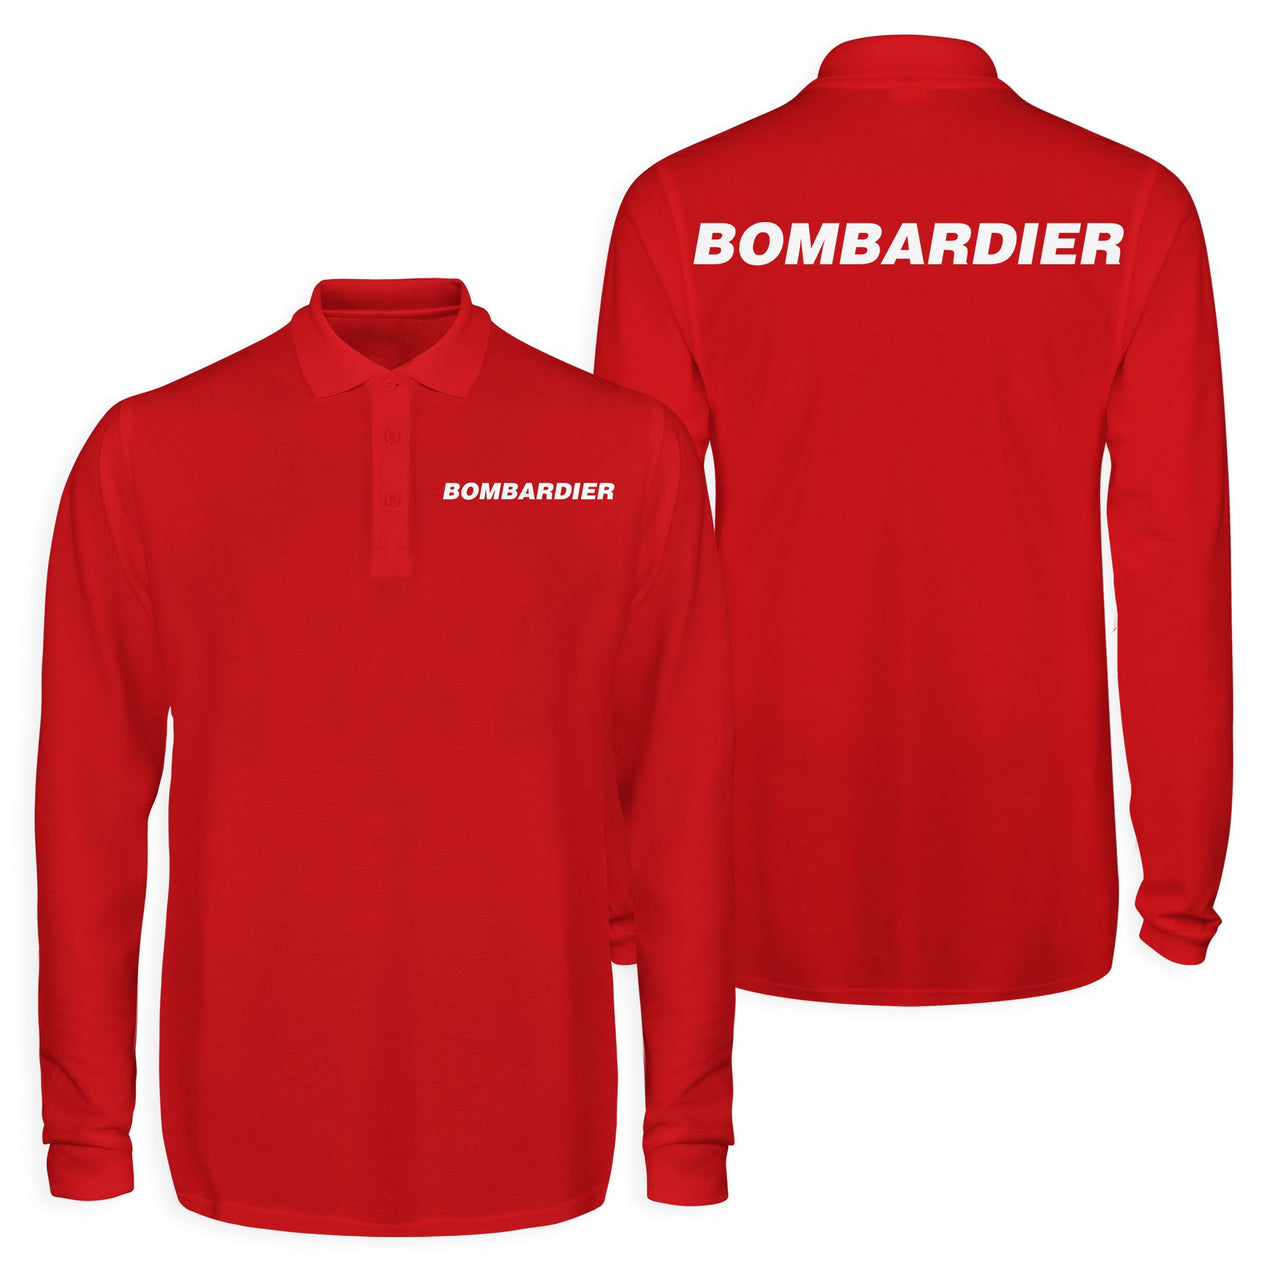 Bombardier & Text Designed Long Sleeve Polo T-Shirts (Double-Side)